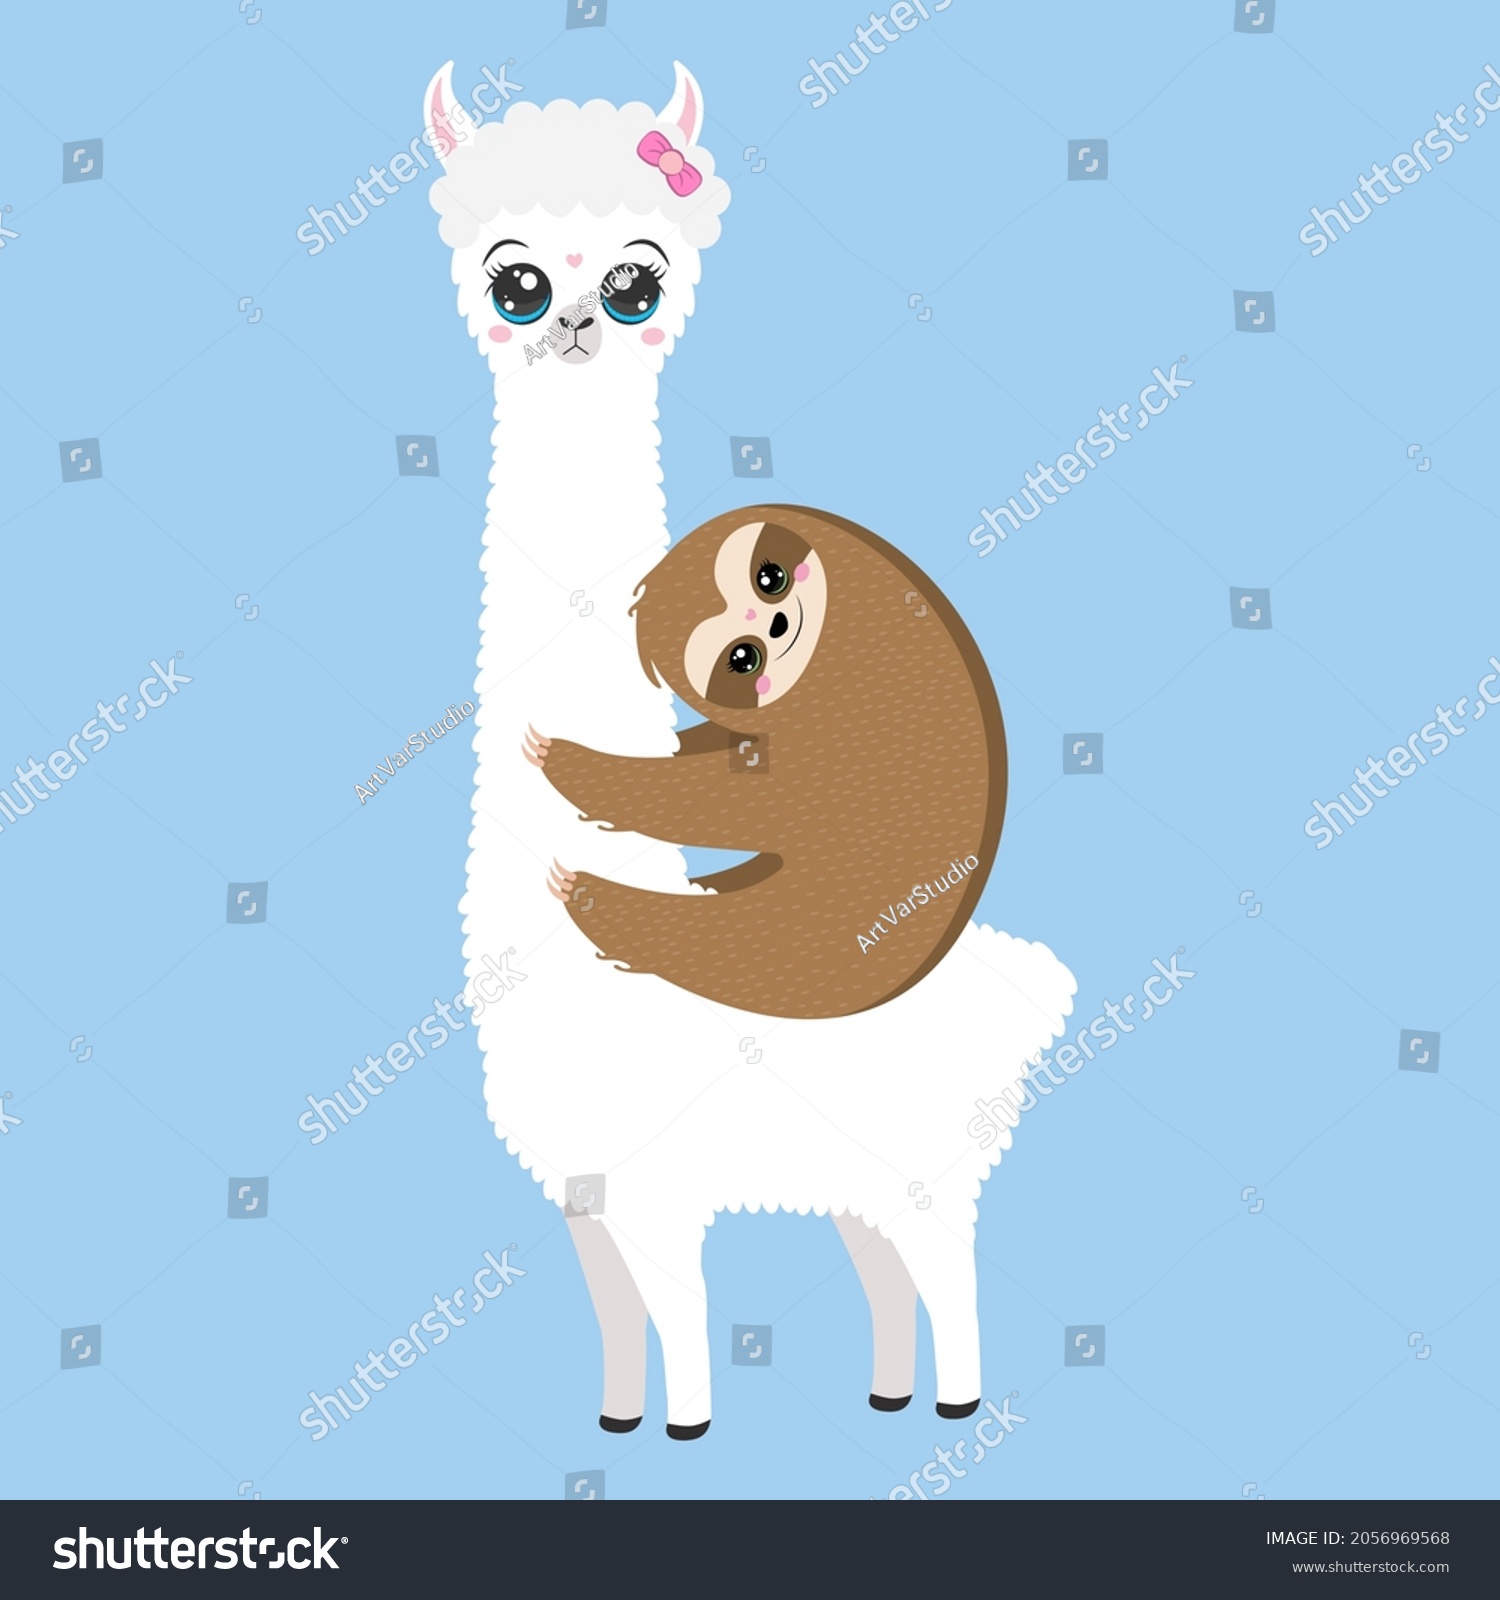 SVG of Beautiful prints for baby clothes, stickers, phone cases and more. Each of the llamas is saved in a separate file for ease of use. Files in which alpaca llamas are saved. svg